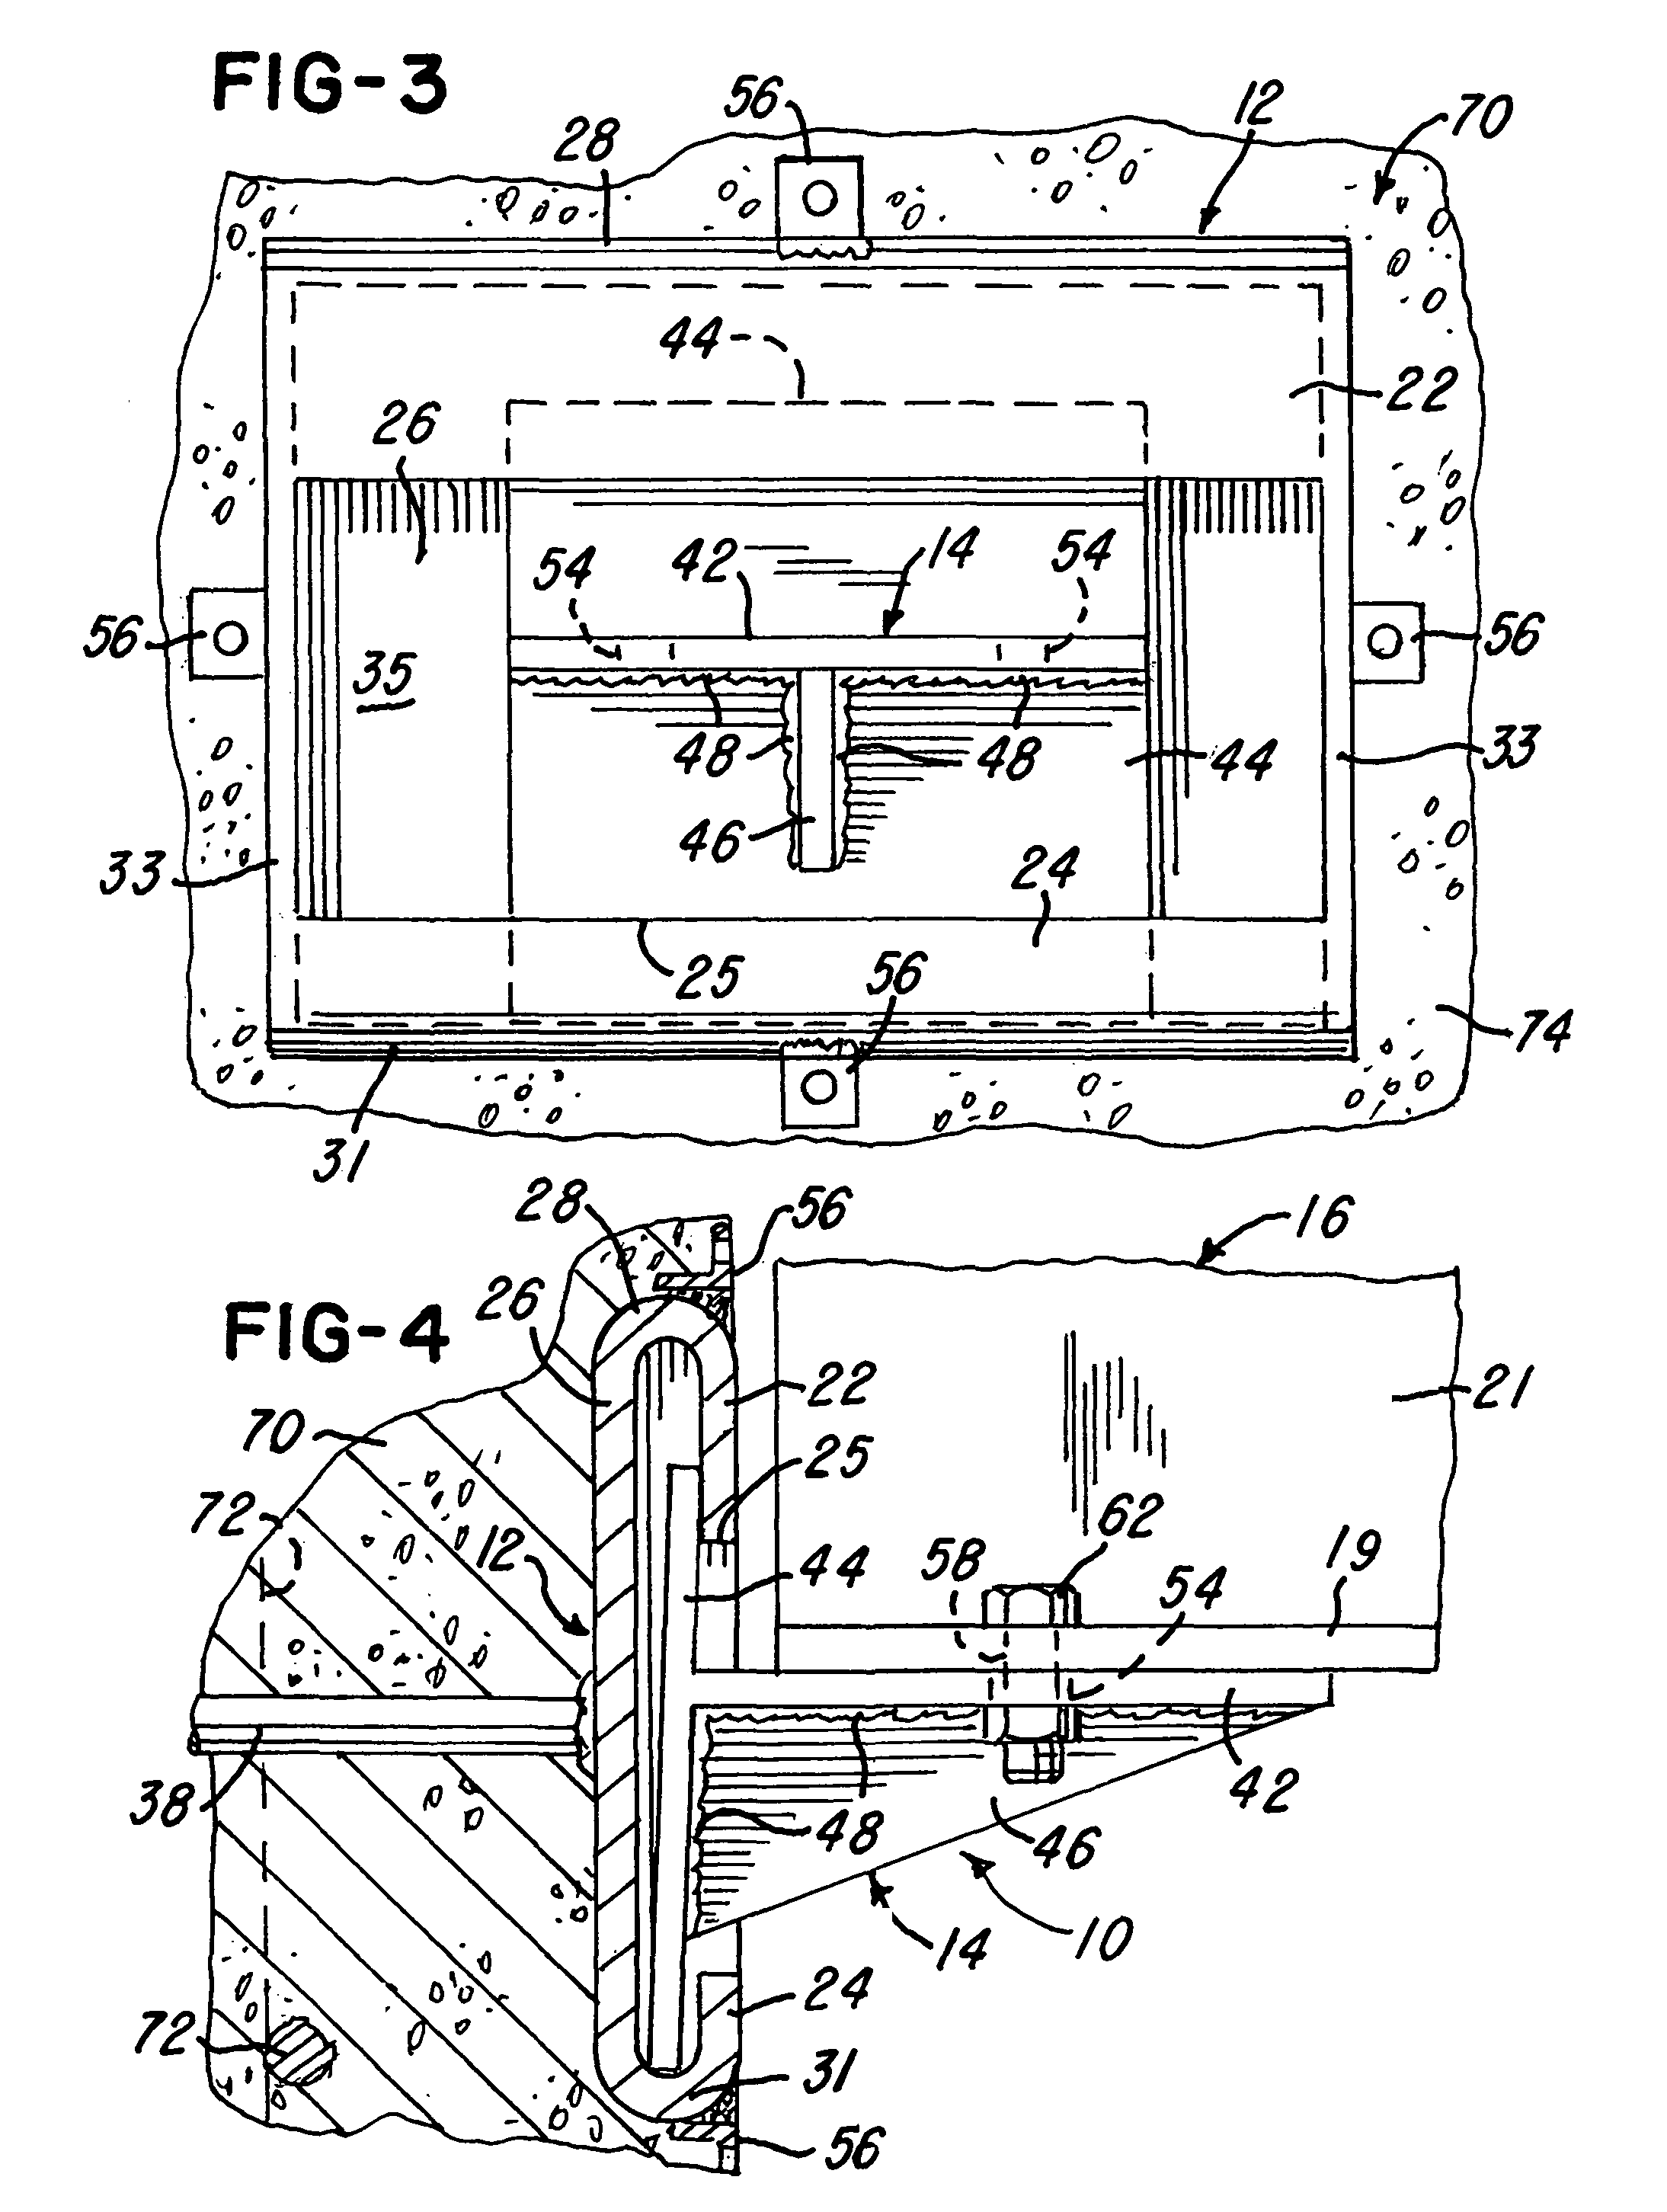 Connector system for securing an end portion of a steel structural member to a vertical cast concrete member